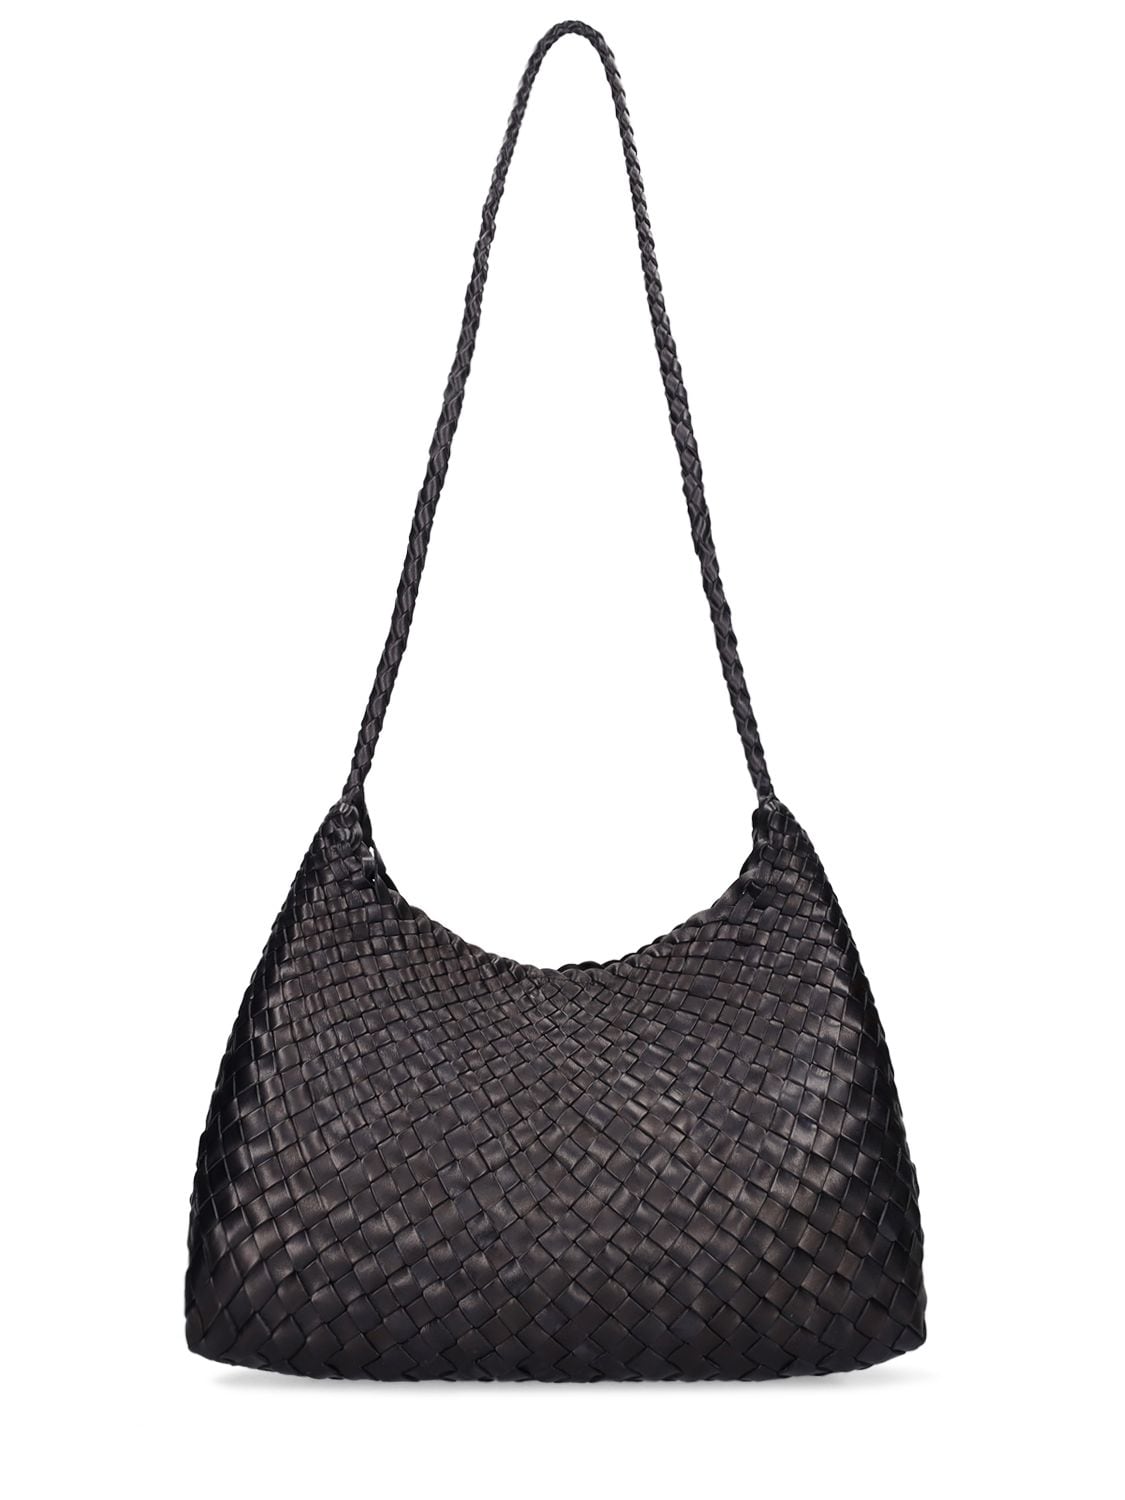 Image of Santa Rosa Handwoven Tapered Leather Bag